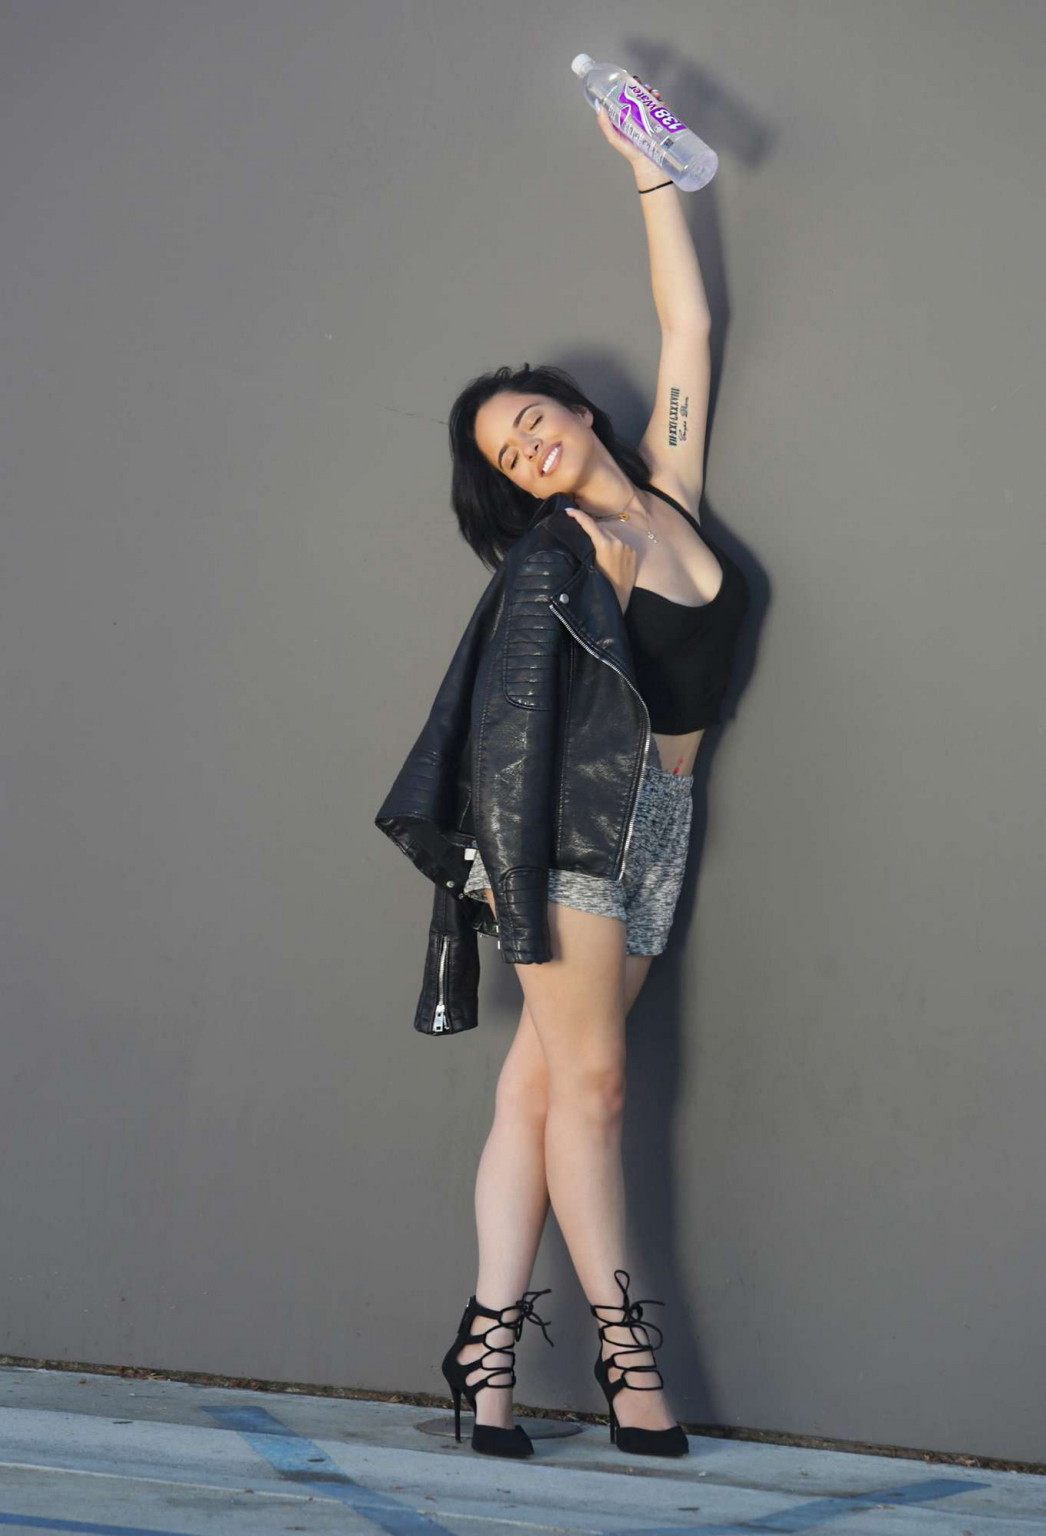 Carmireli cleavy and leggy wearing black belly top and shorts at the photoshoot  #75180694